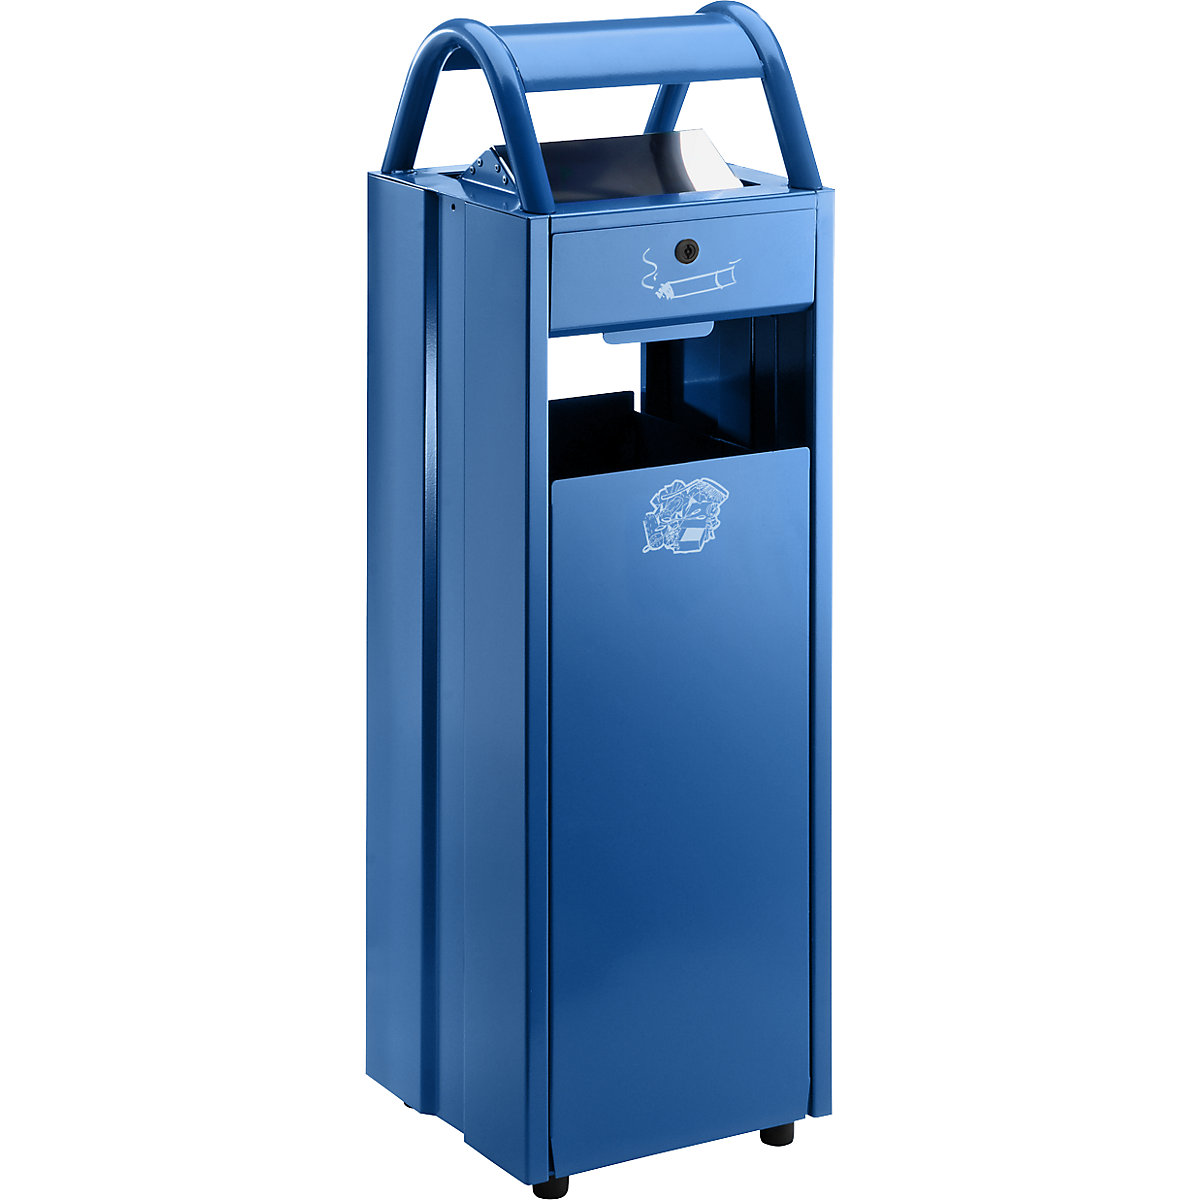 Waste collector with ashtray and rain protection hood – VAR, capacity 35 l, WxHxD 300 x 960 x 250 mm, gentian blue RAL 5010-3